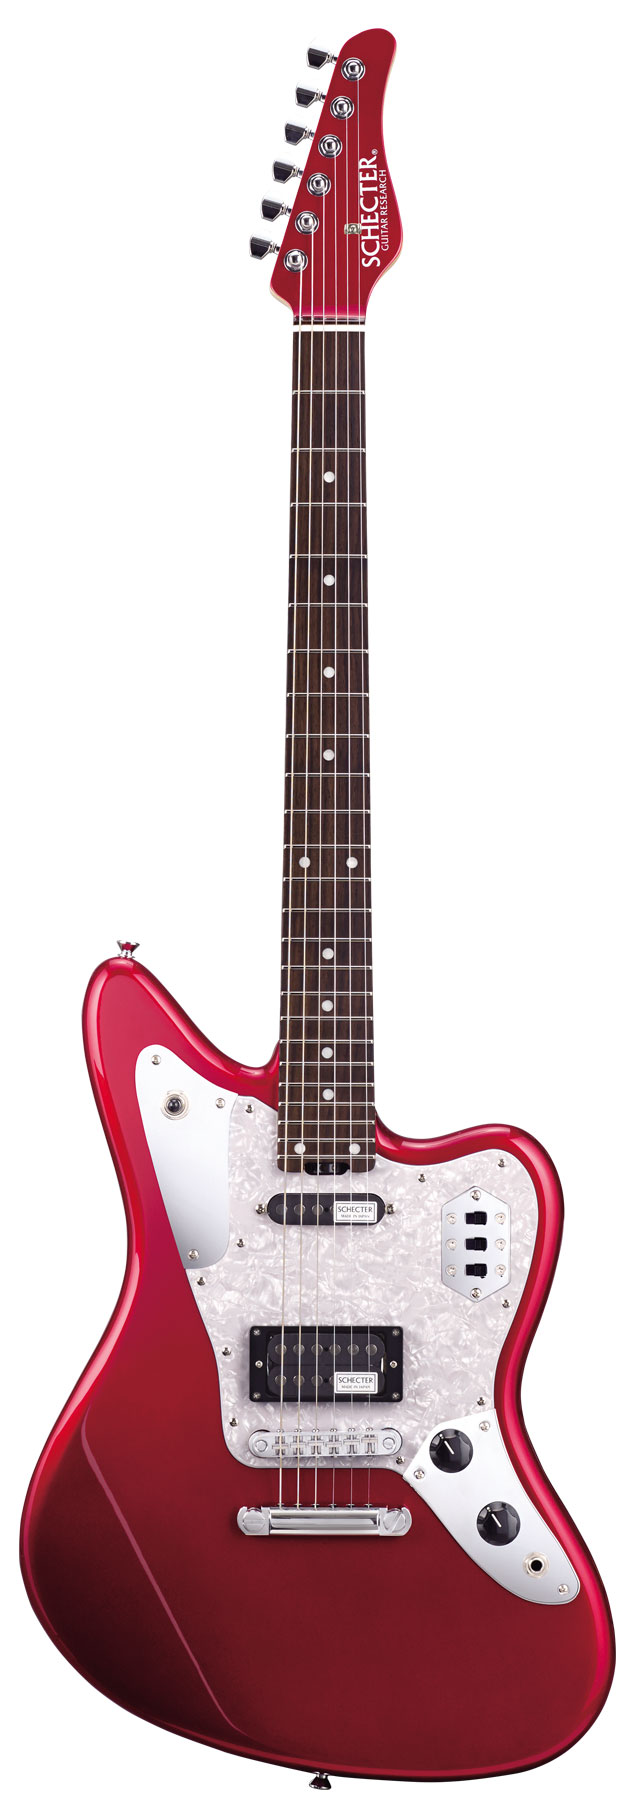 SCHECTER AR-06 / Candy Apple Red [シェクター][エレキギター][国産 MADE IN JAPAN] [メンテナンス無料] 【受注生産】